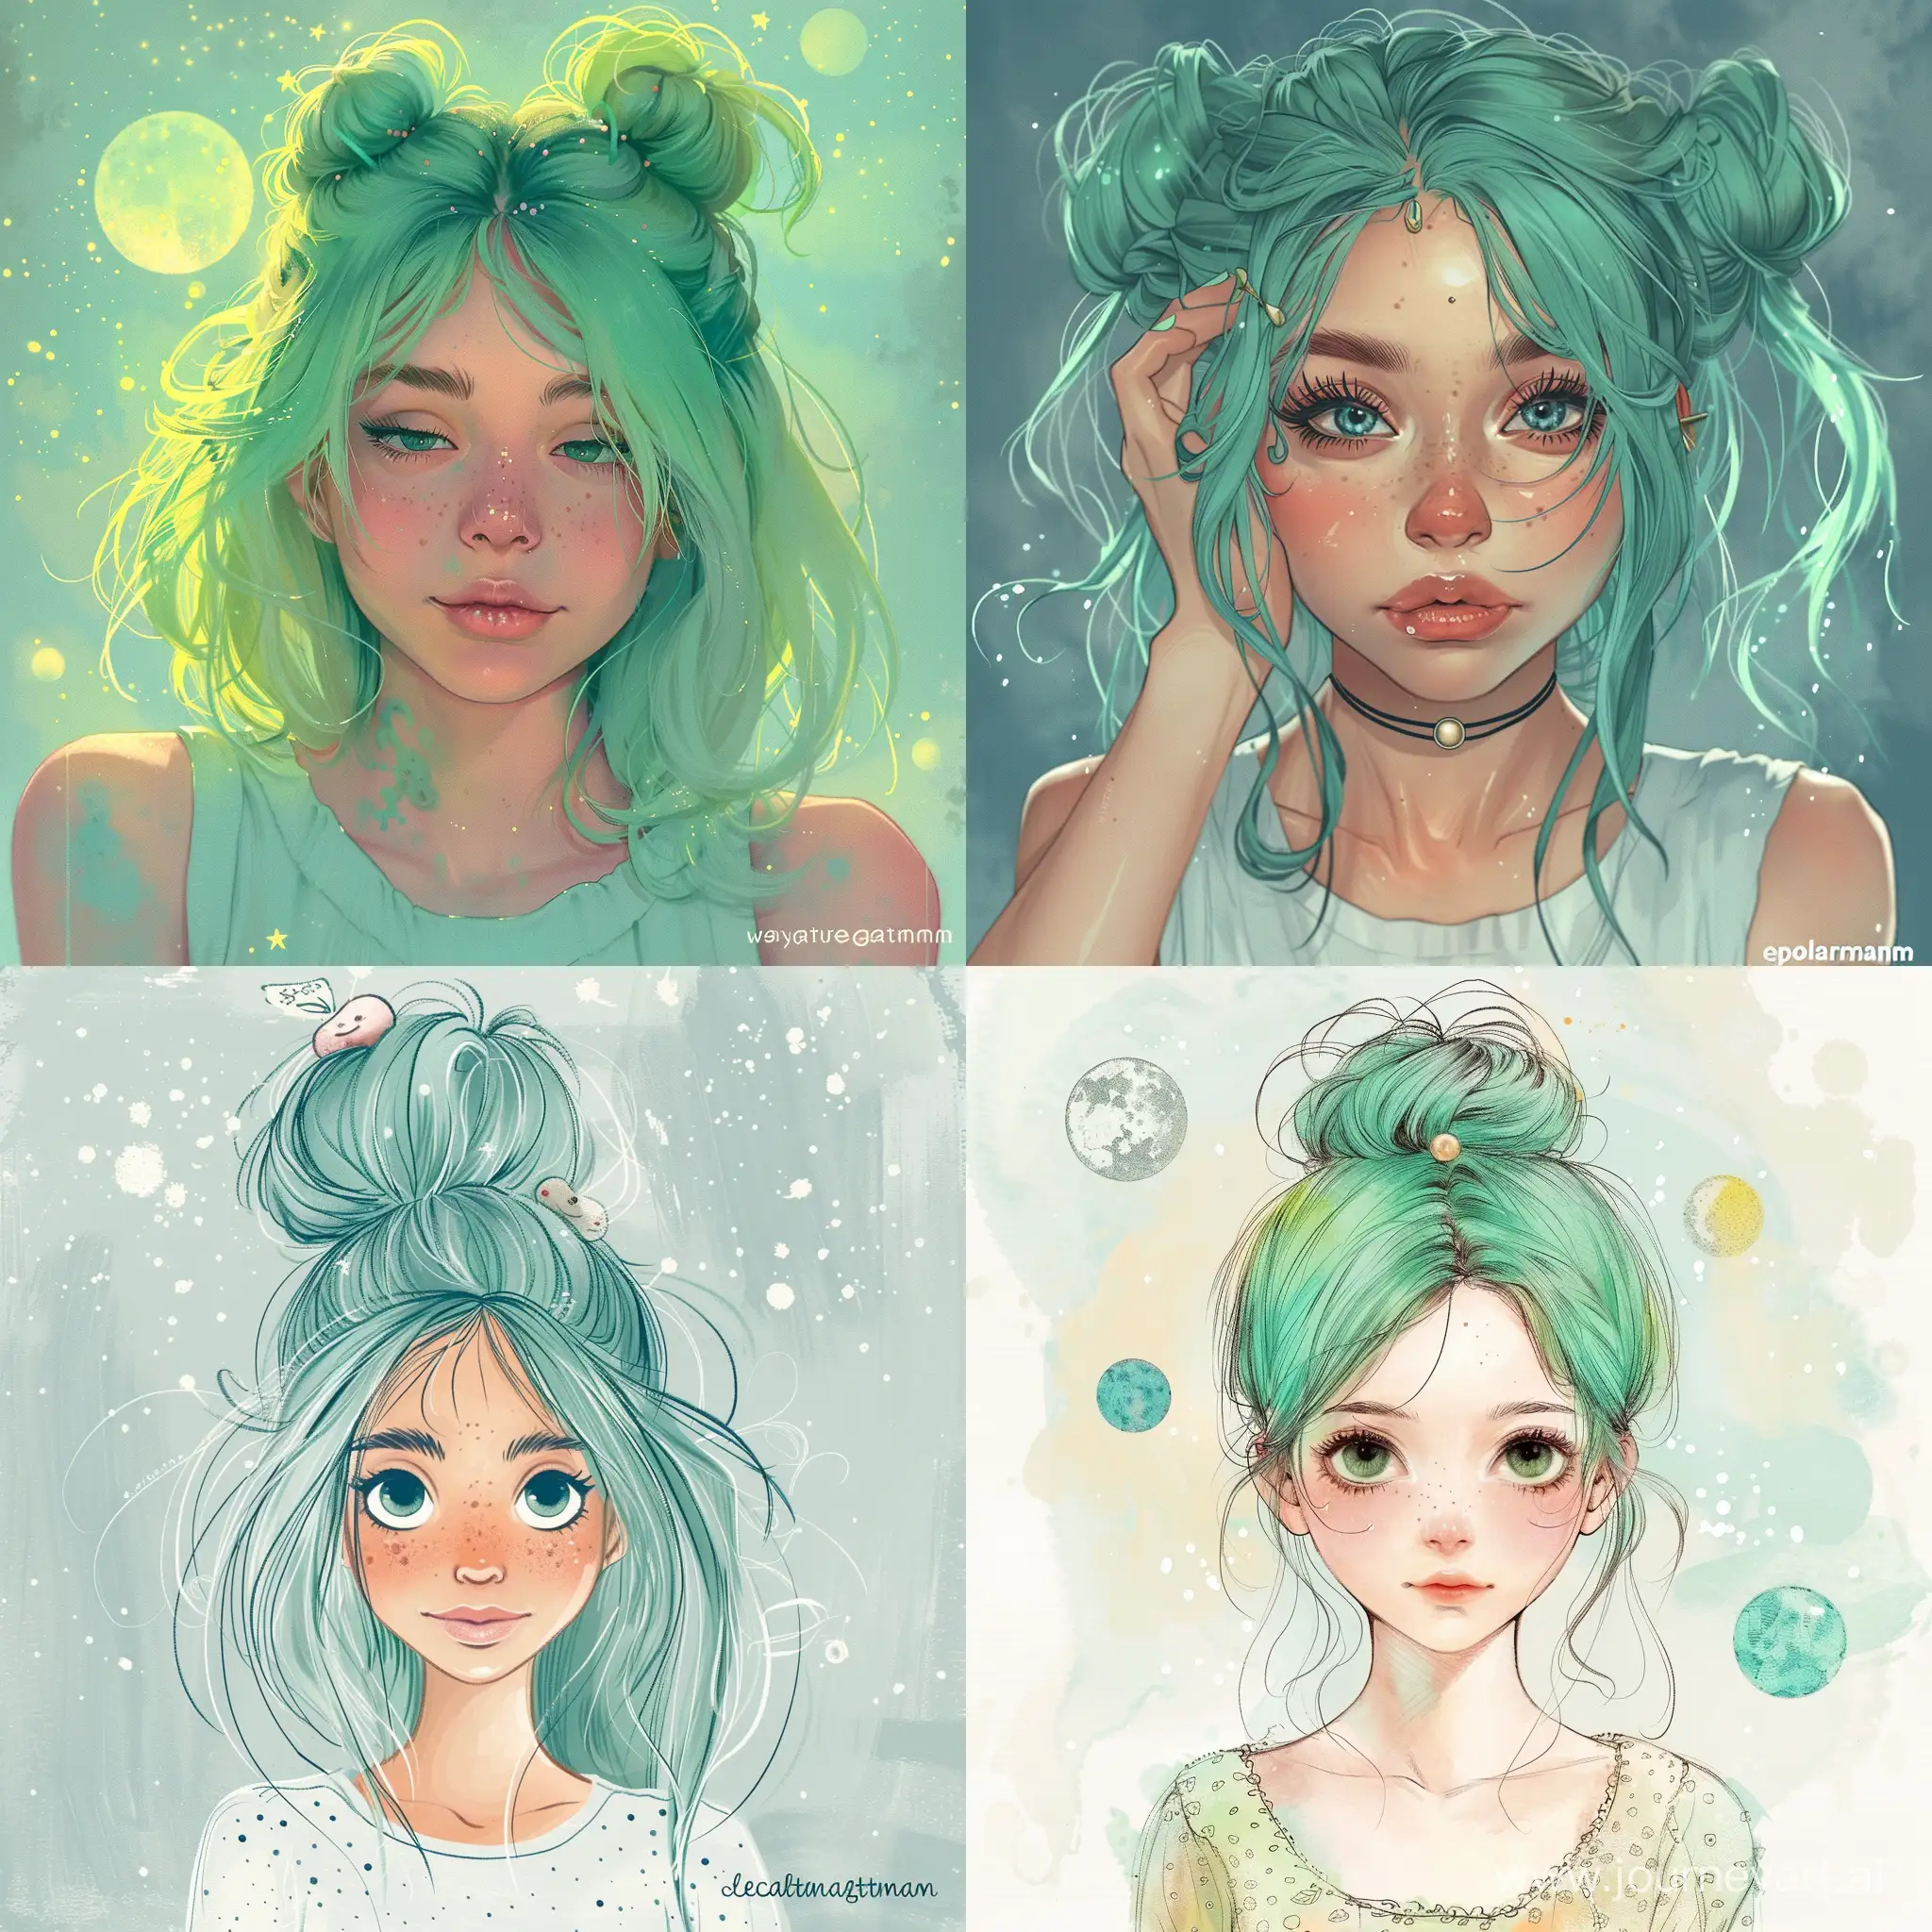 AnimeInspired-Portrait-with-Crisp-NeoPop-Illustrations-and-Mint-Green-Hair